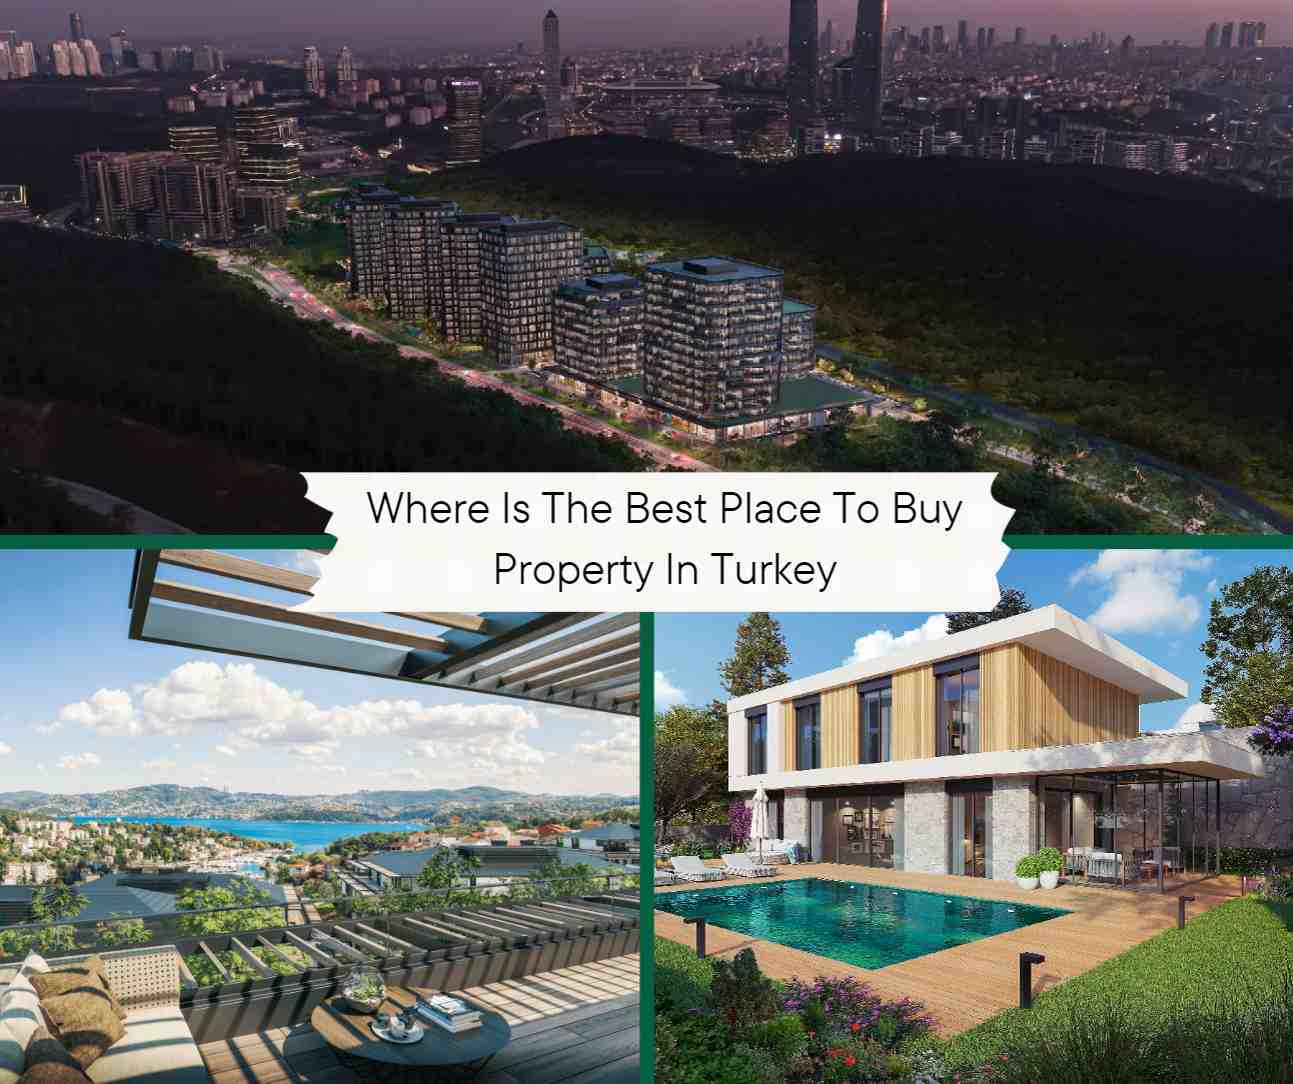 Where Is The Best Place To Buy Property In Turkey